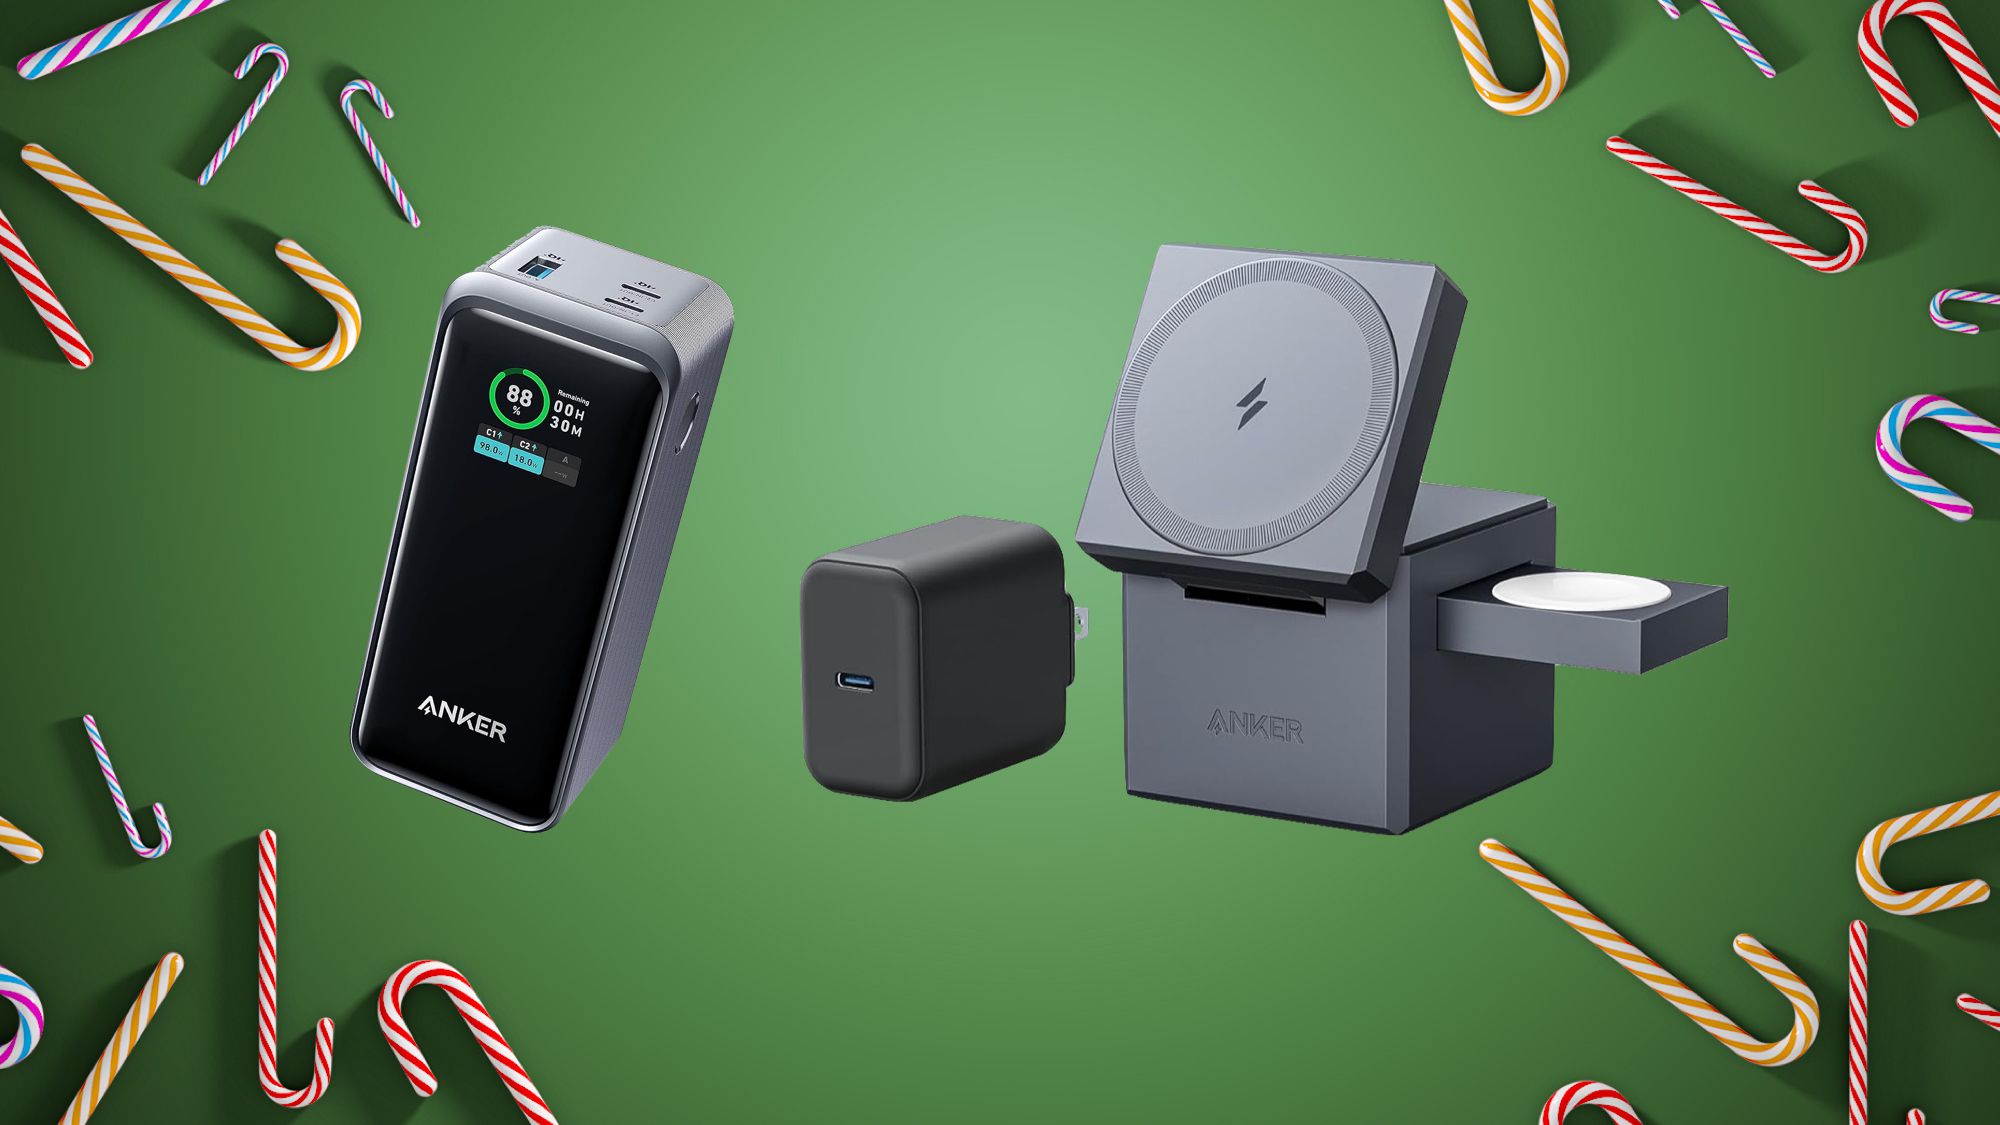 This Anker Prime Black Friday sale makes Prime Day look like a joke